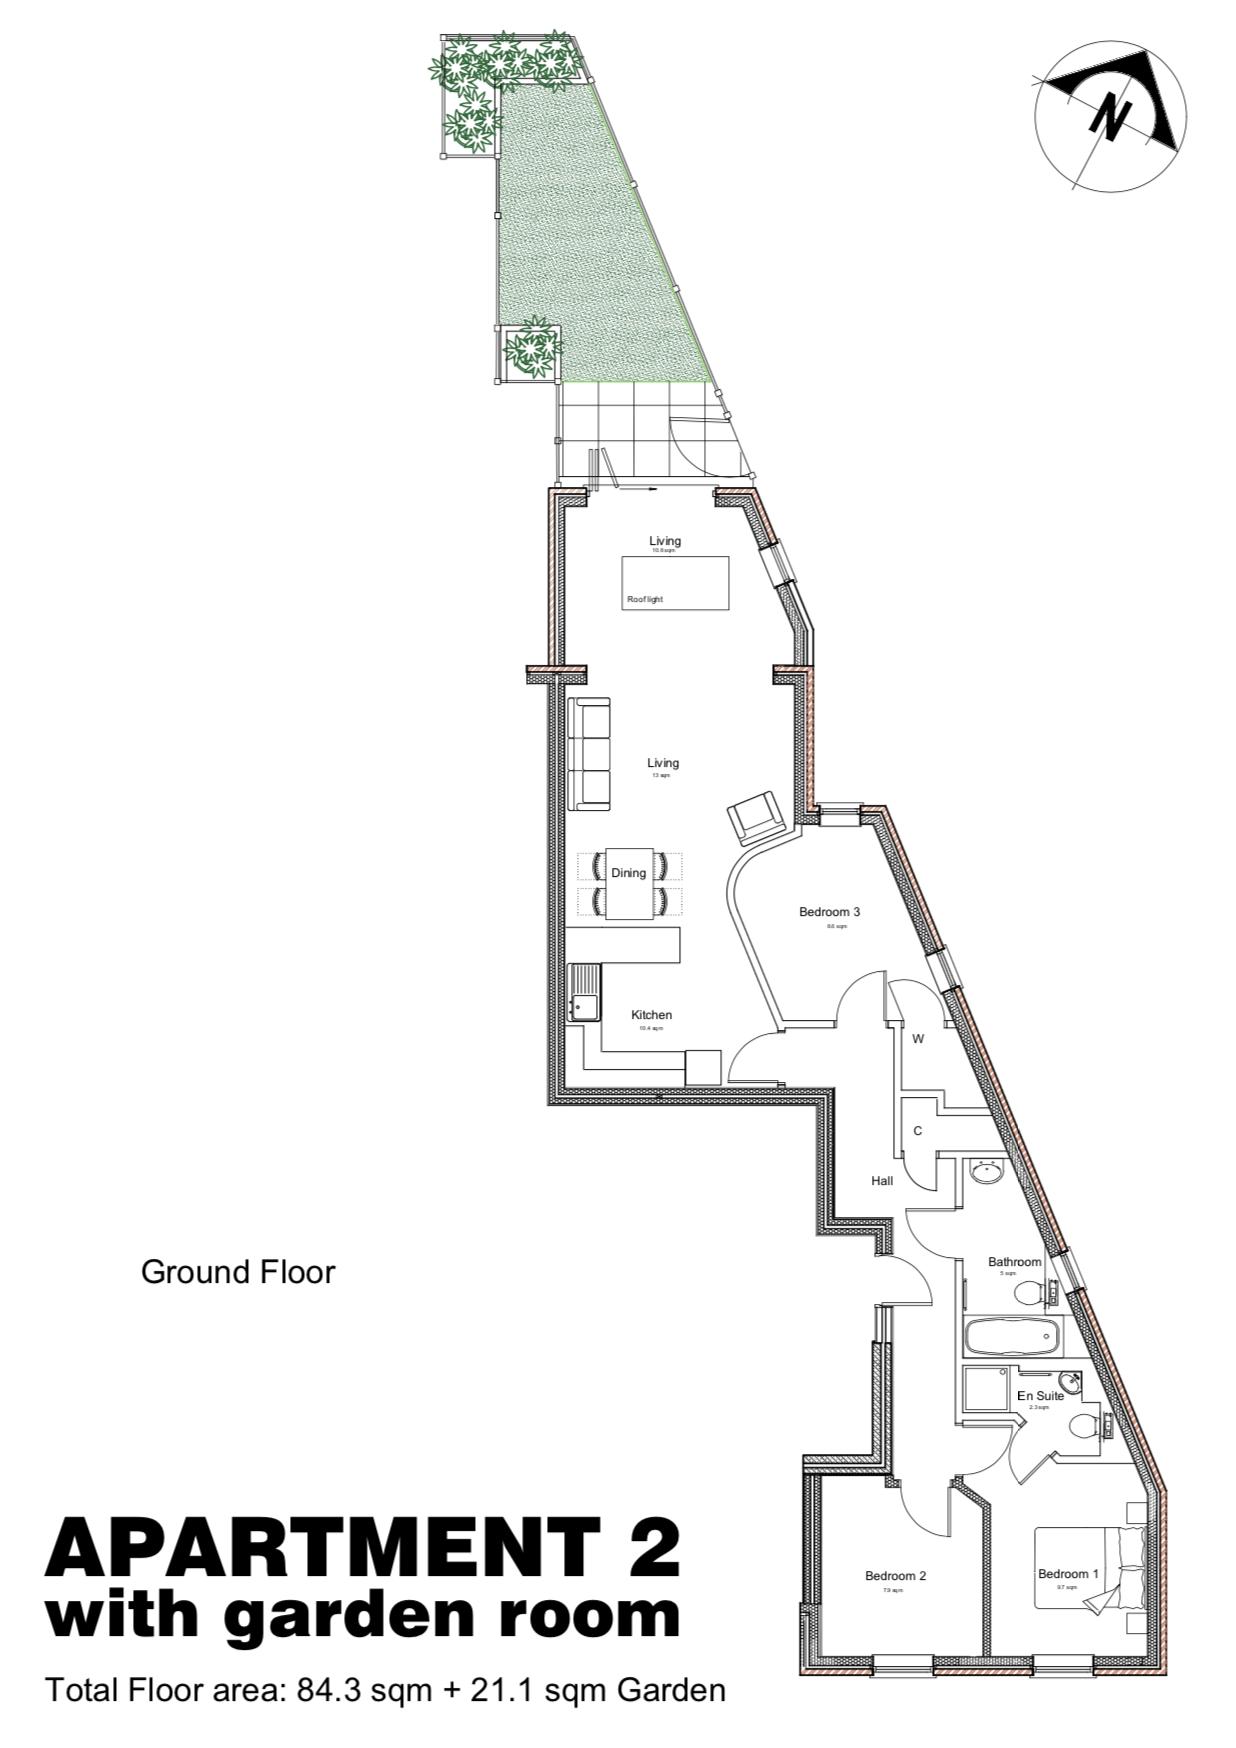 Proposed plan for additional living area